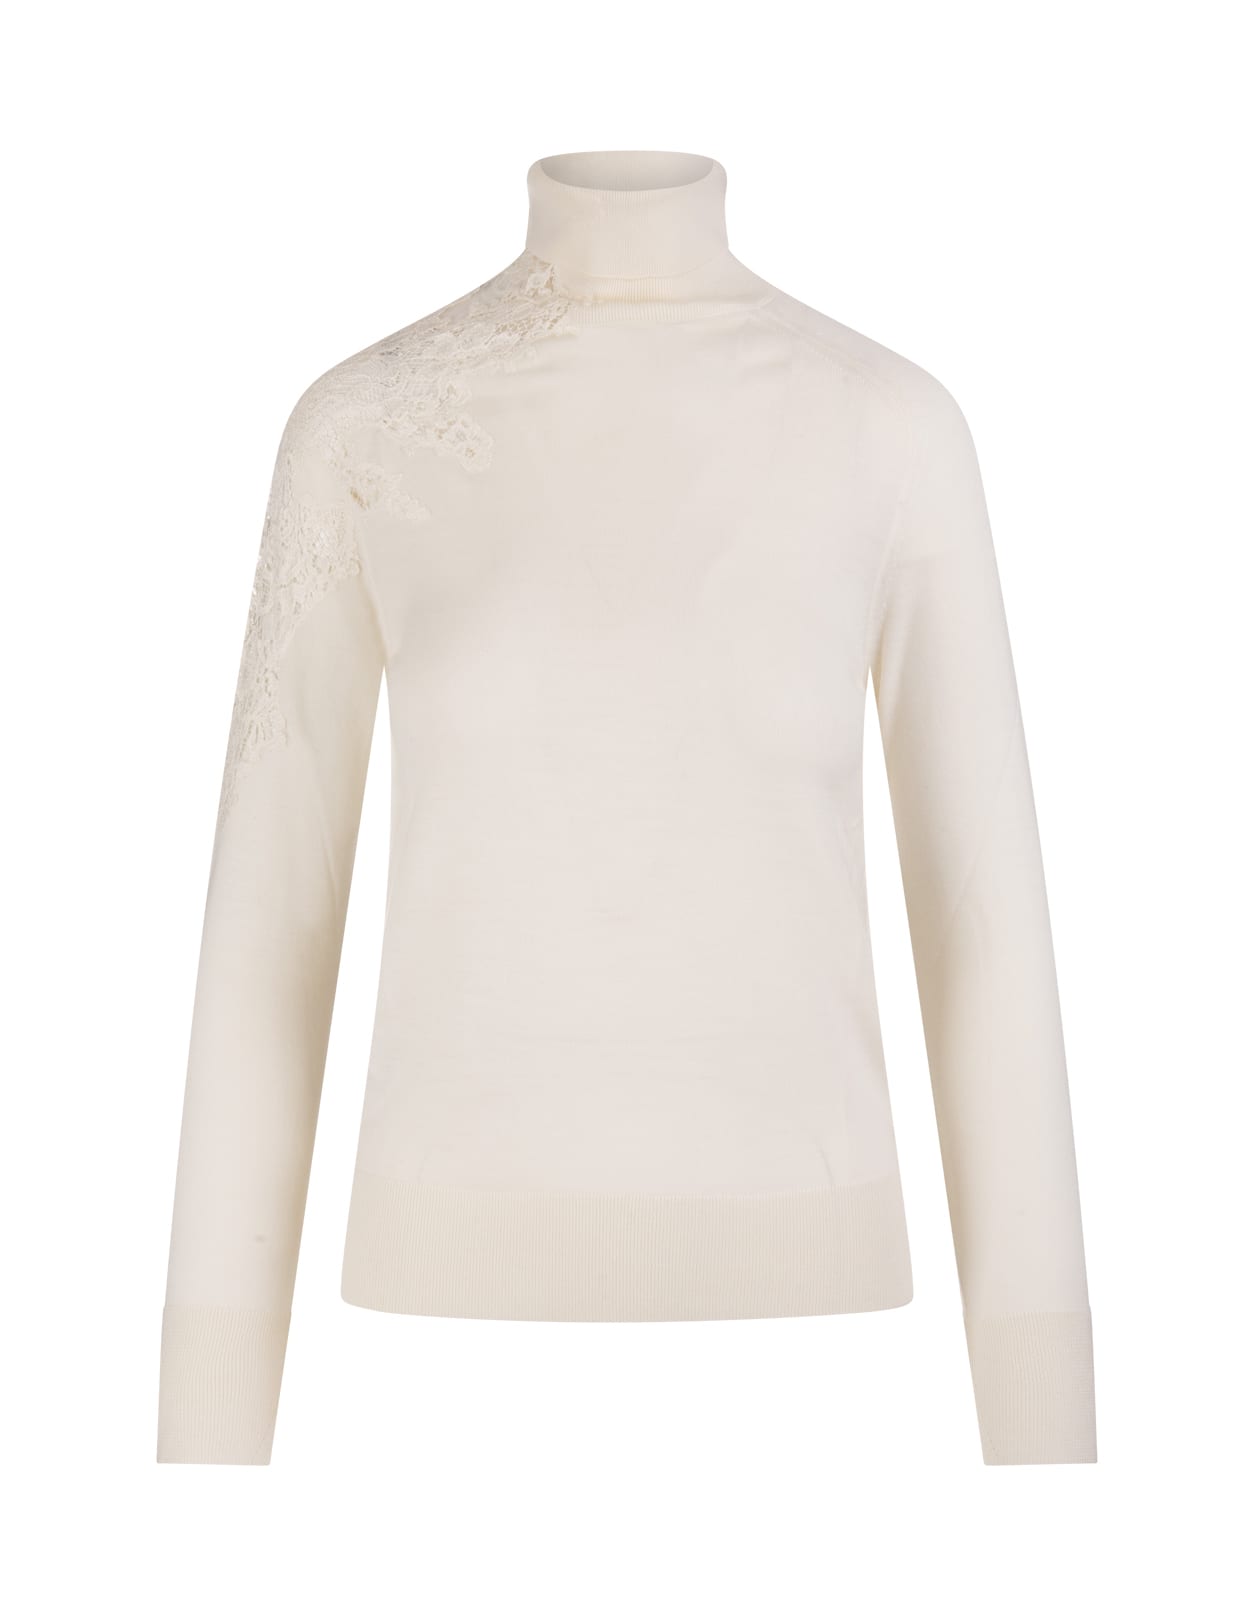 Ermanno Scervino White Wool Turtleneck With Lace